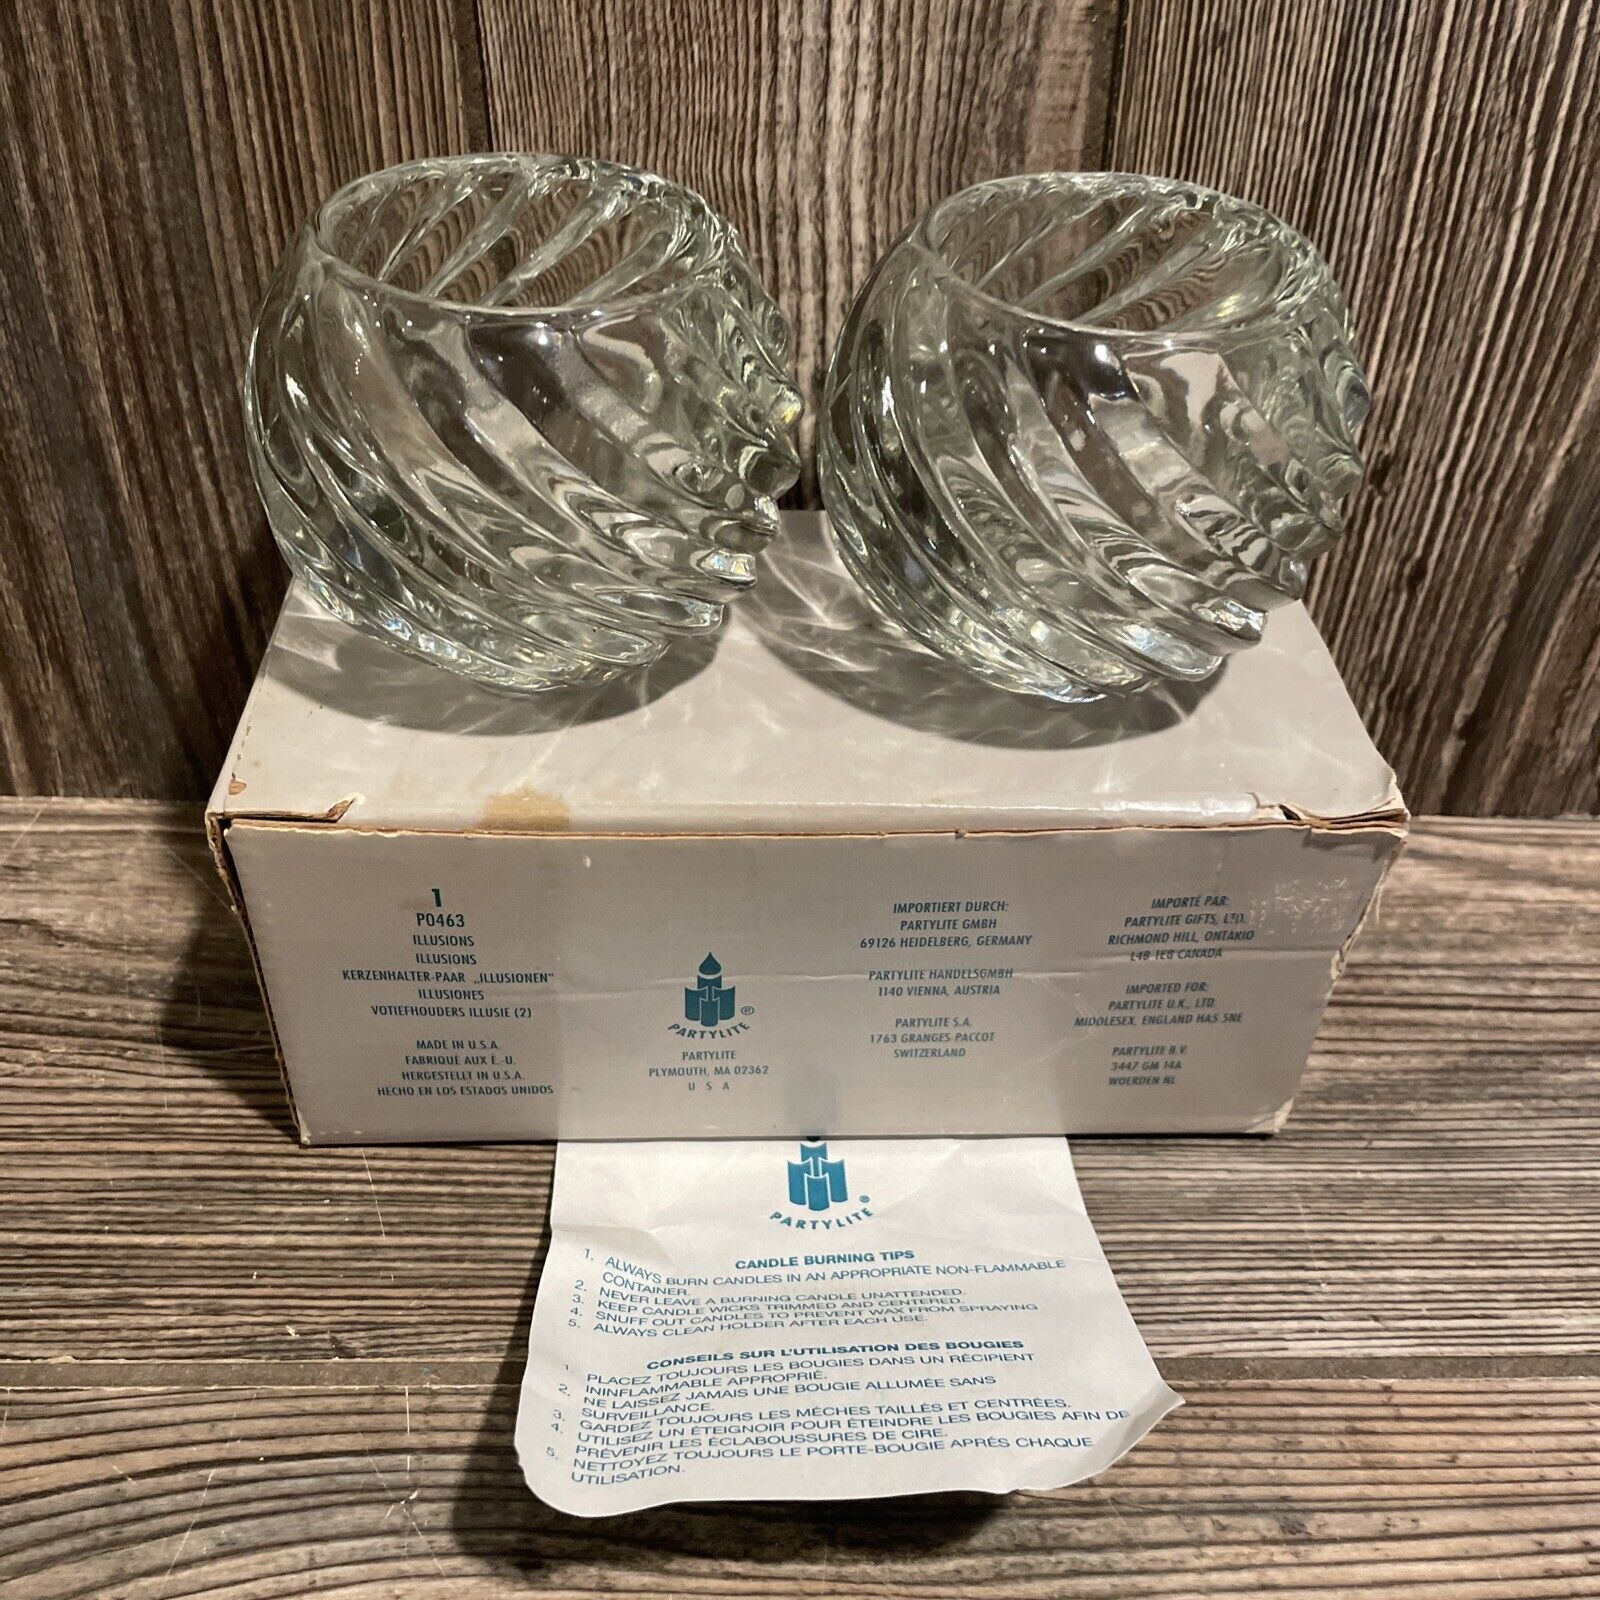 Partylite Illusions Swirl Glass Votive Pair Candle Holders P0463 New in box